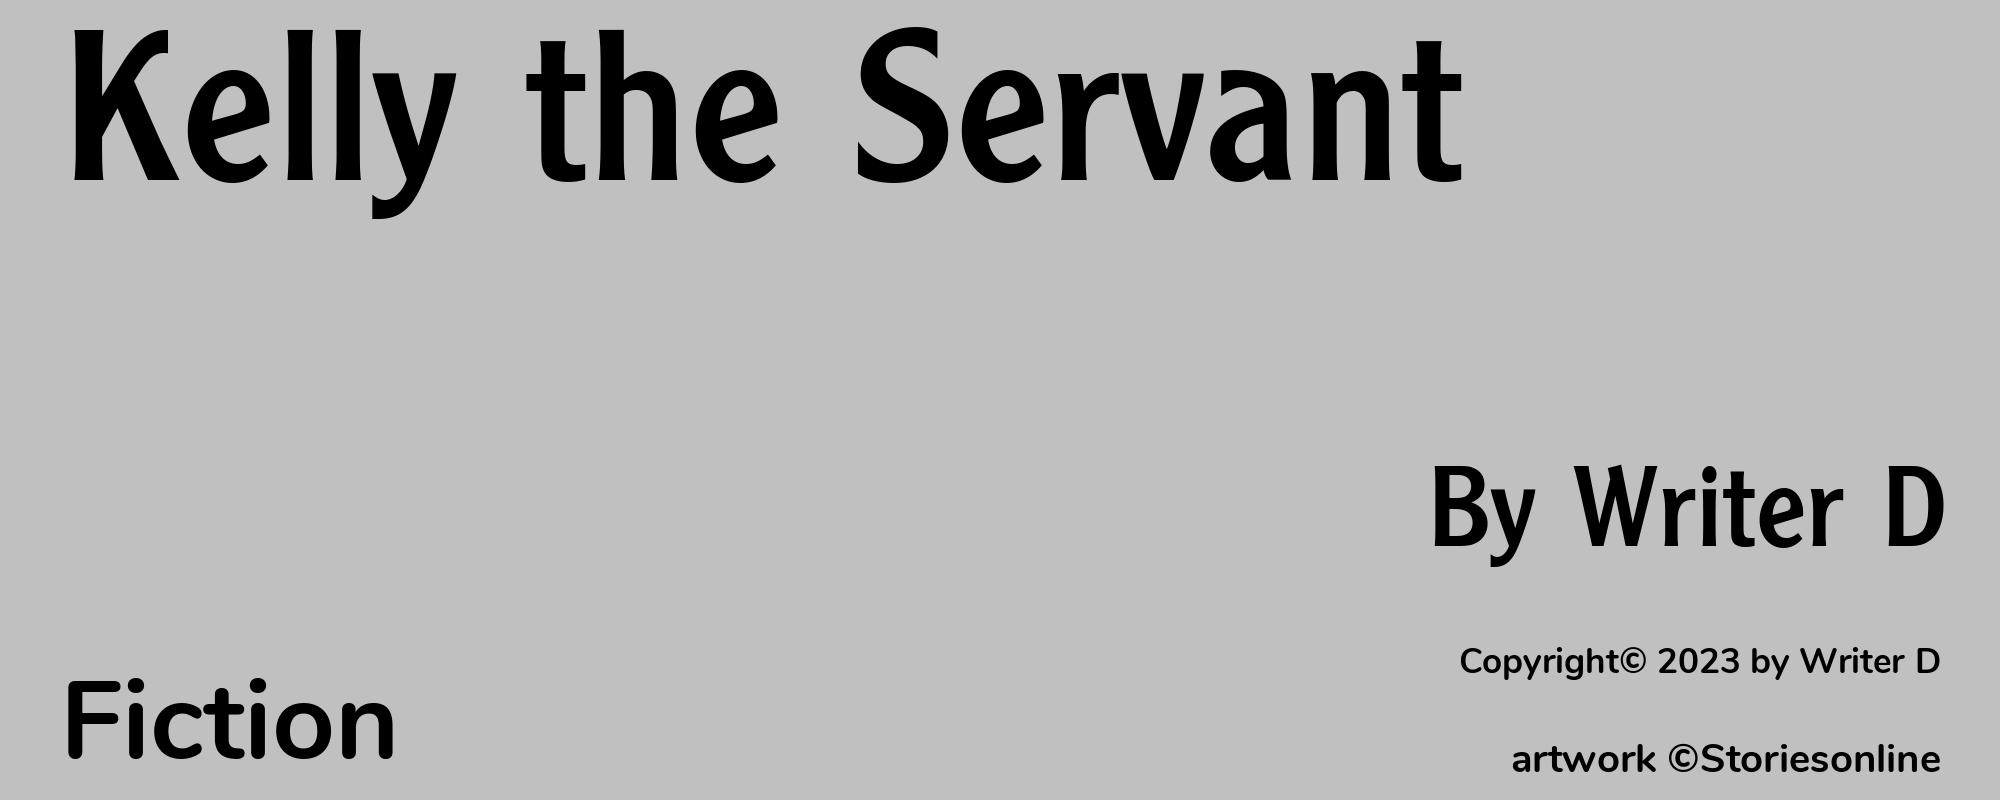 Kelly the Servant - Cover